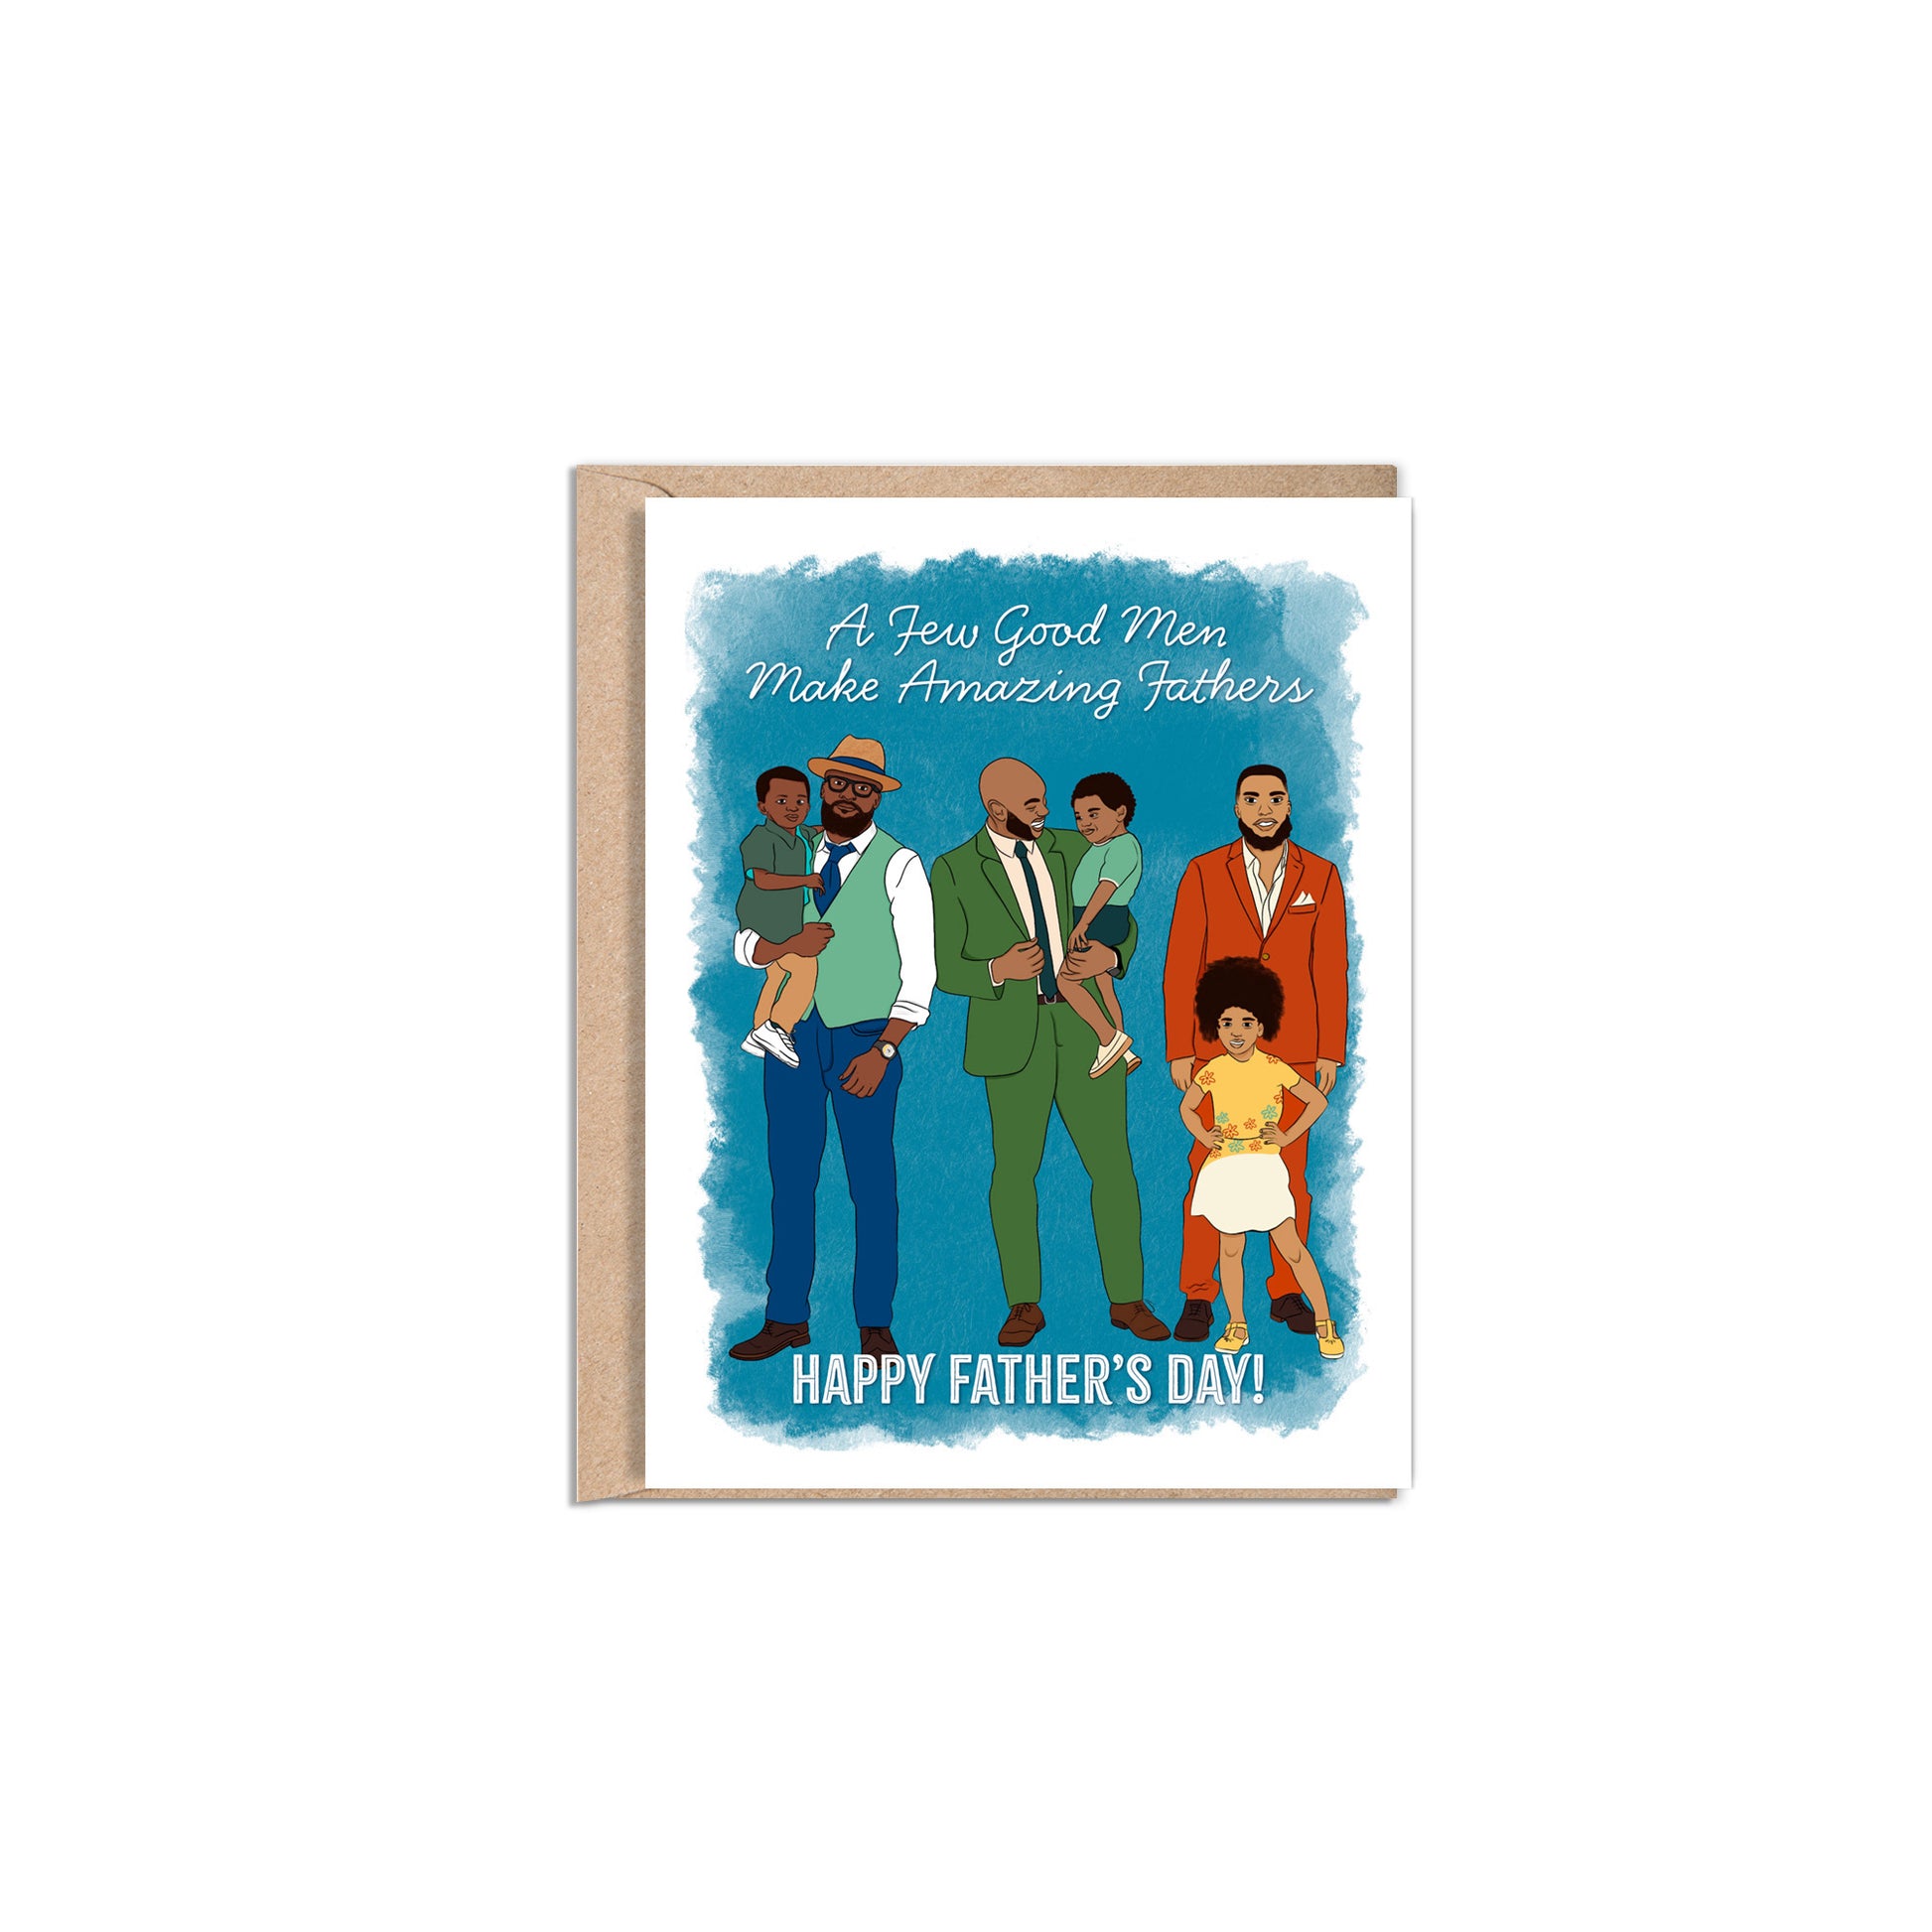 4.25 x 5.5” A2 size greeting card illustration of three African American Fathers standing with their kids. Two dads are holding their kid in their arms while another dad stands with his daughter in front of him. Each dad is wearing a suit in blue, green, or terracotta. At the top of the card are the words “A Few Good Men Make Amazing Fathers” with “Happy Father’s Day” at the bottom. The textured watercolor background has shades of blue with a white border. 